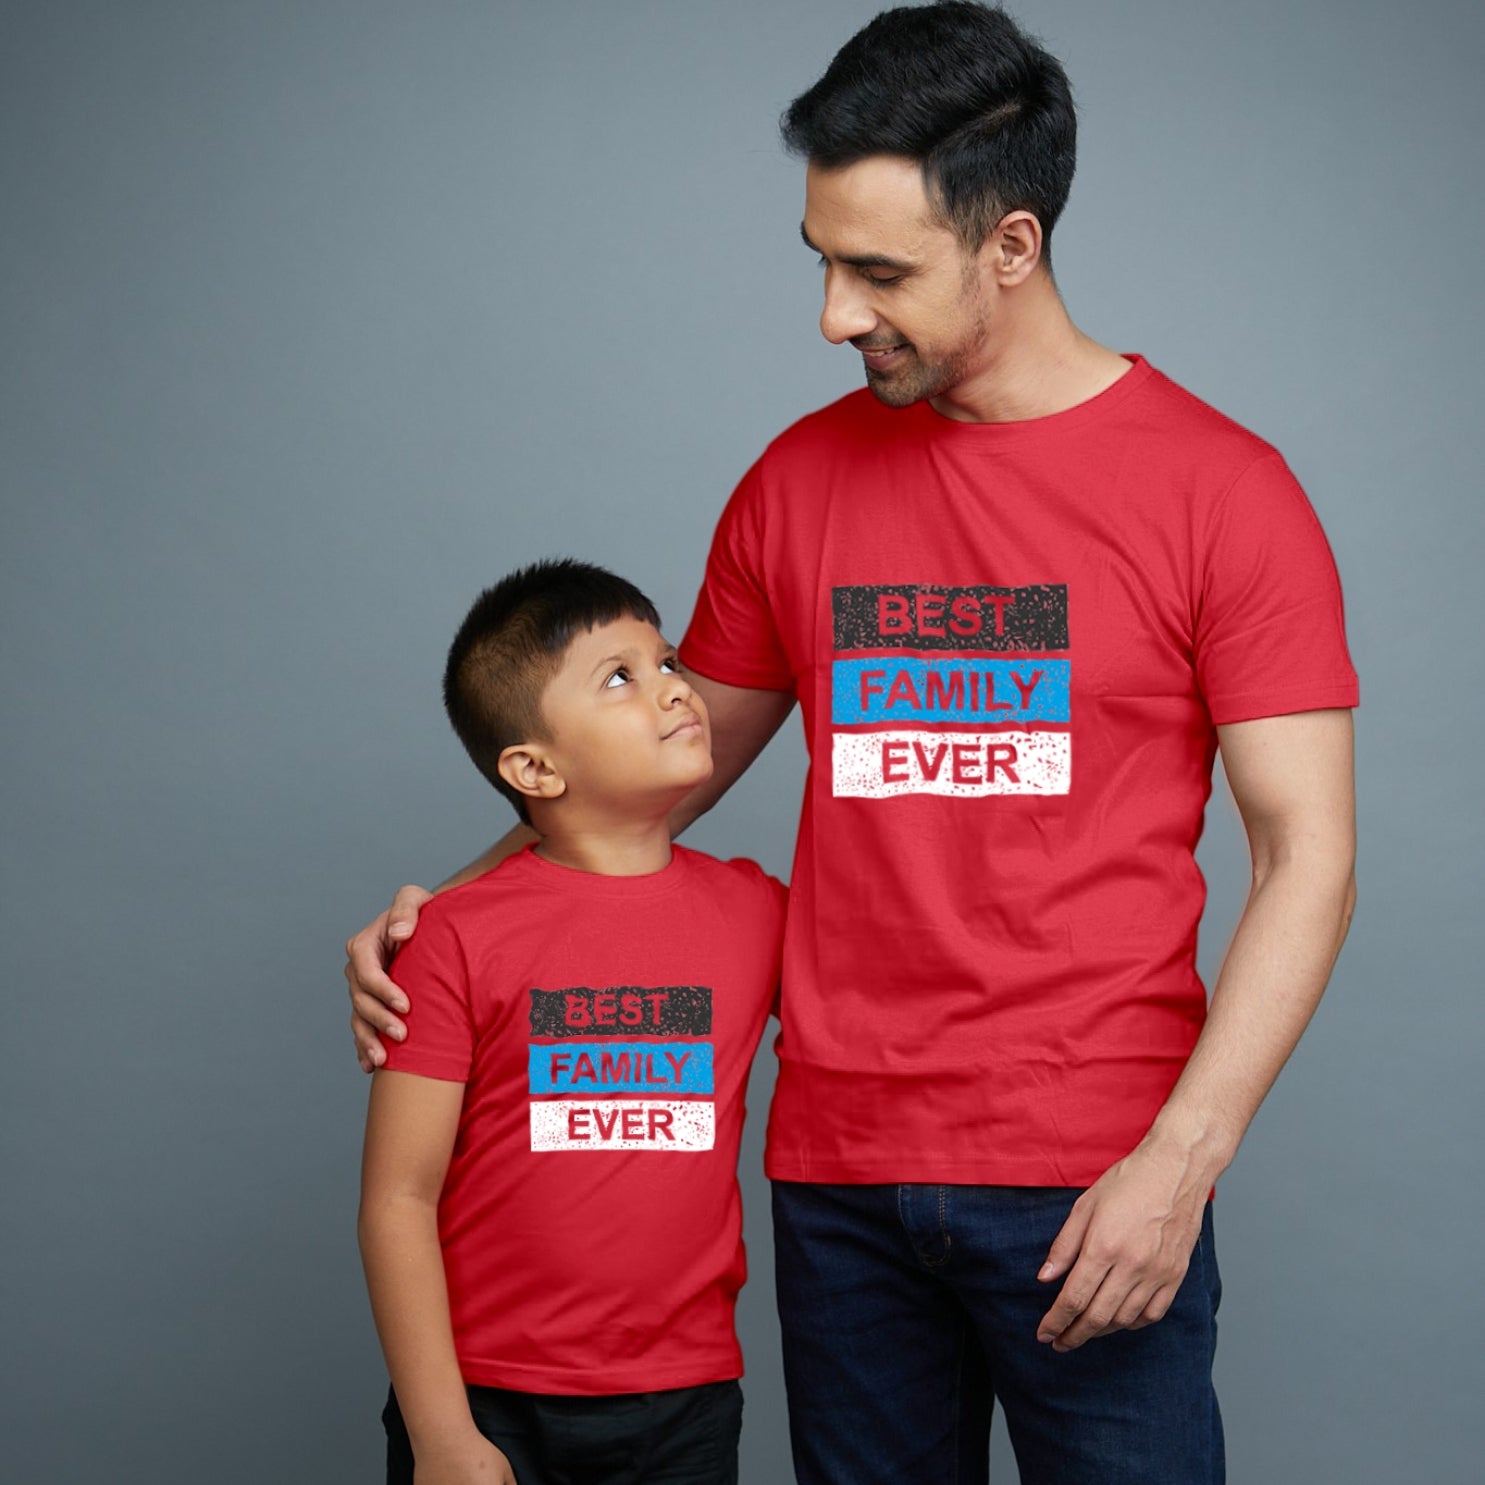 Family of 2 t shirt for Dad Son in Red Colour- Best Family Ever